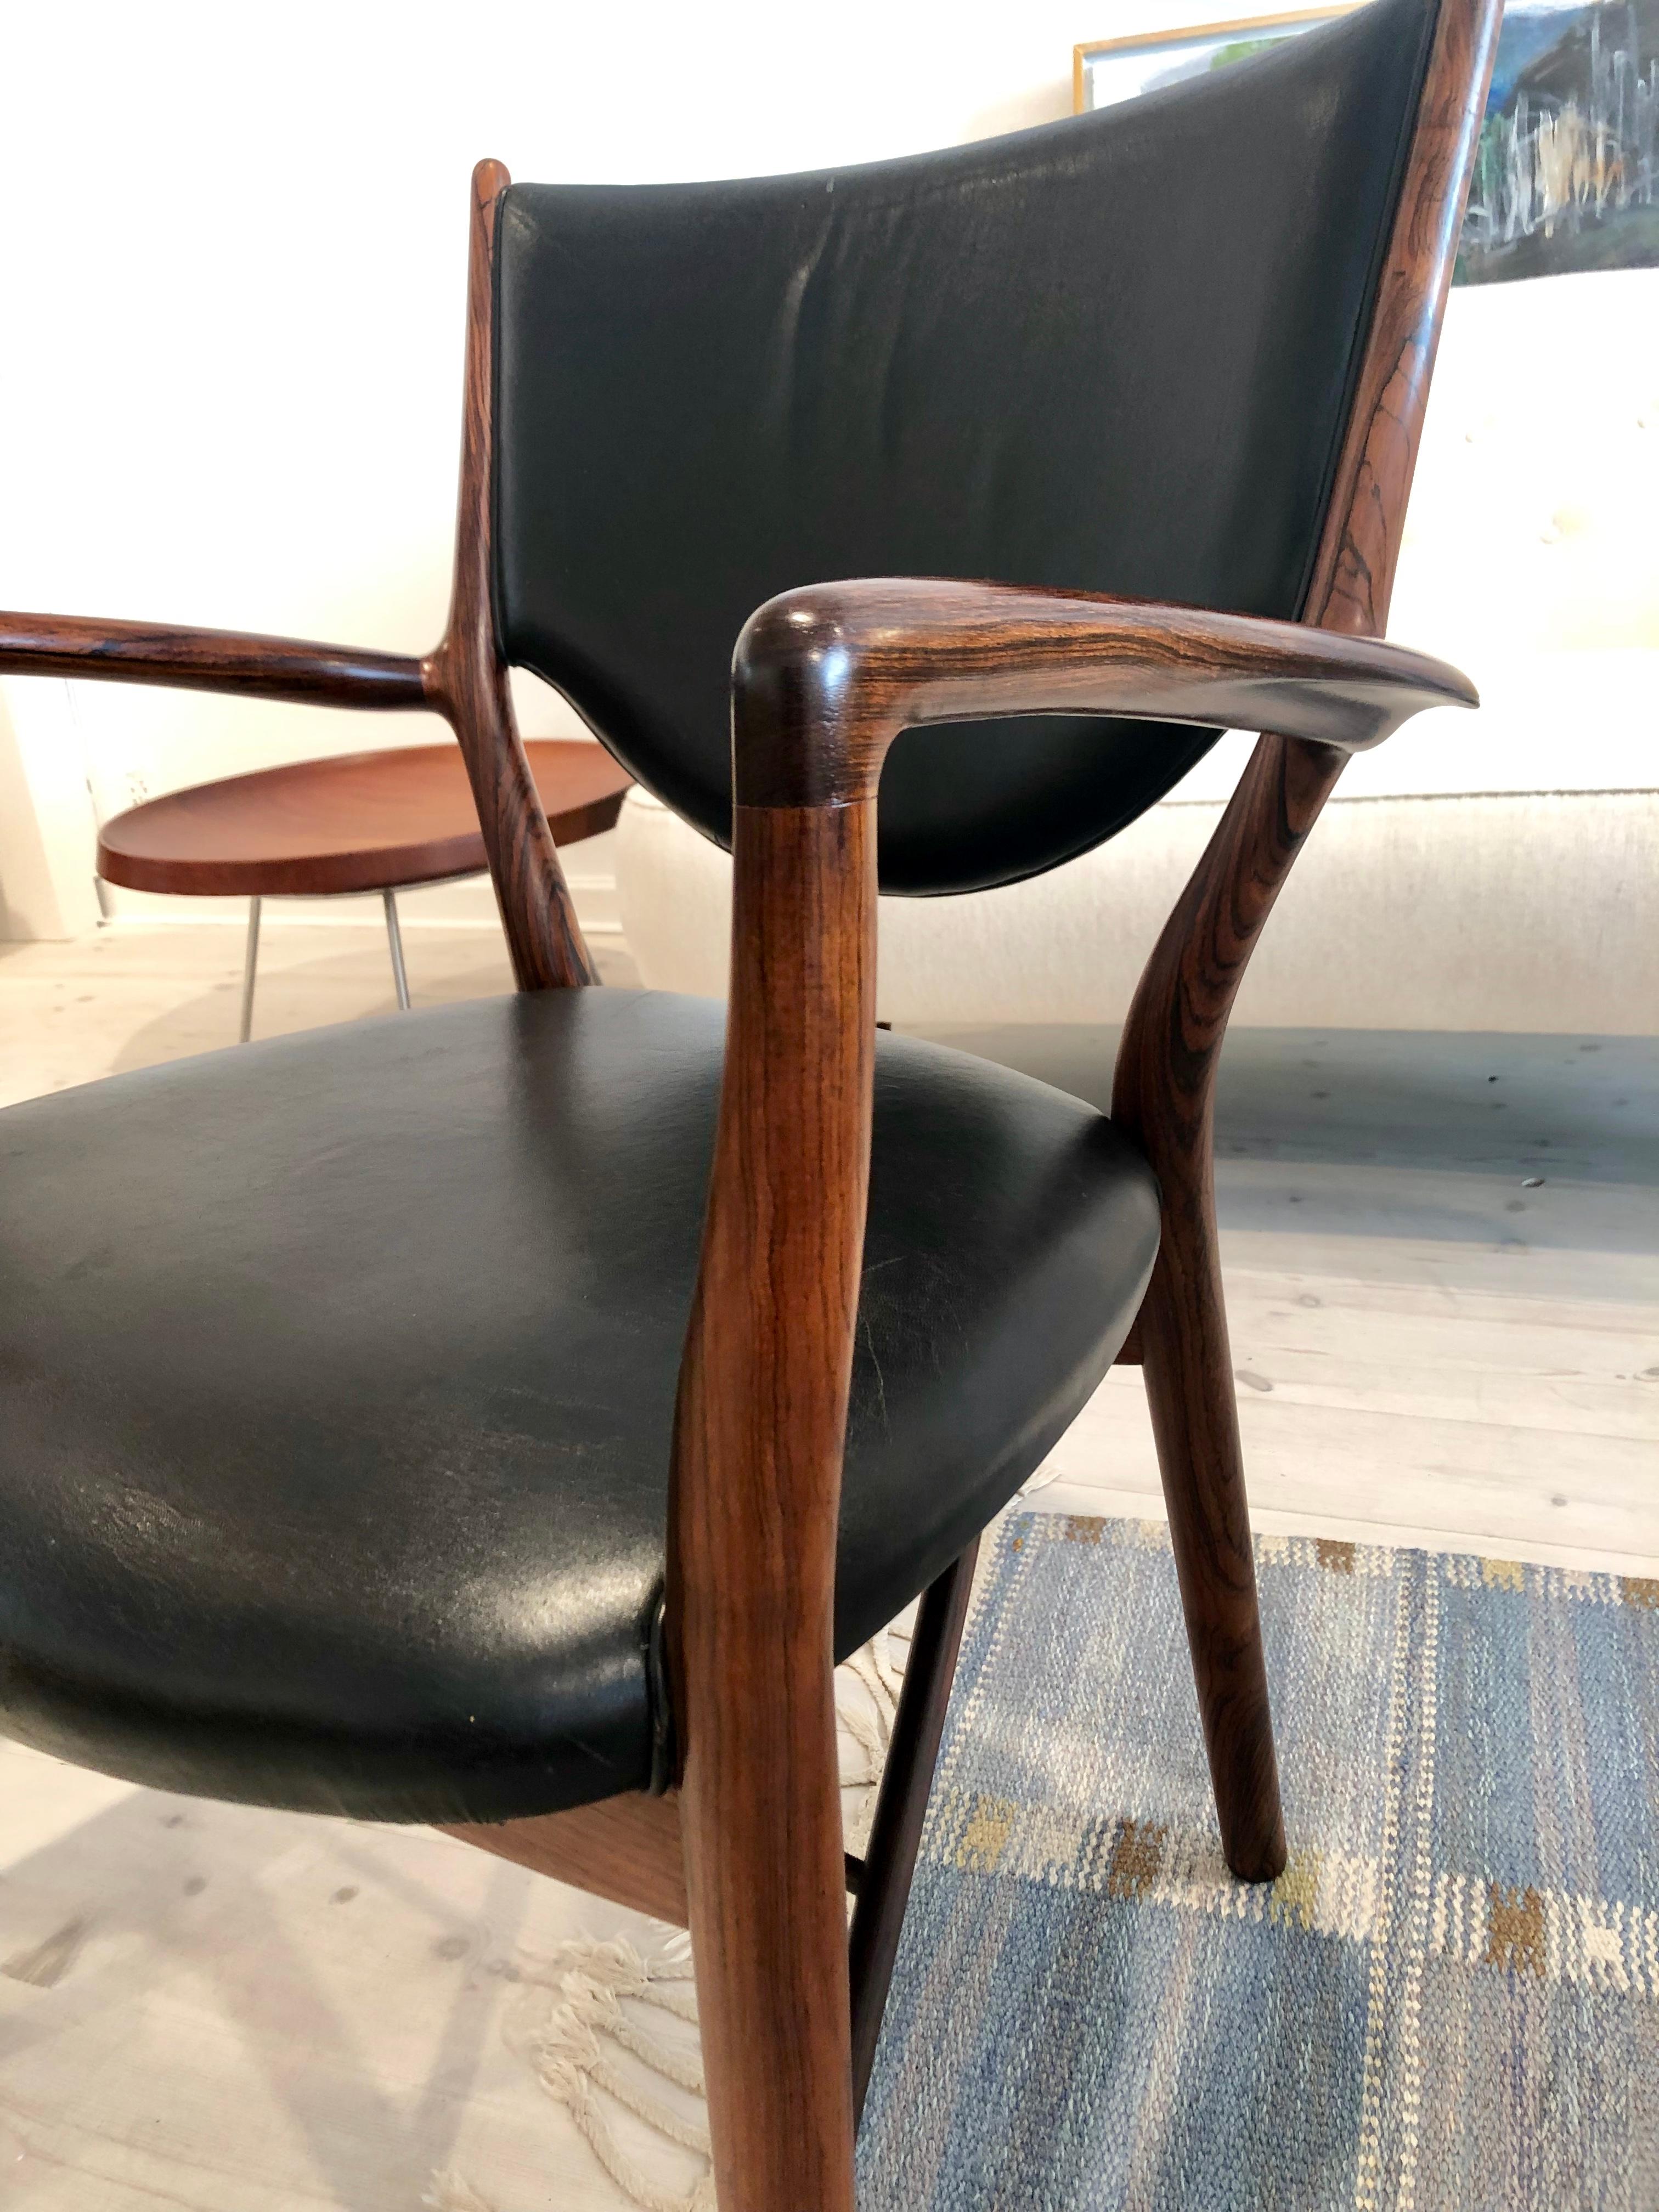 Finn Juhl Pair of NV46 Armchairs in Brazilian Rosewood for Niels Vodder, 1946 For Sale 3